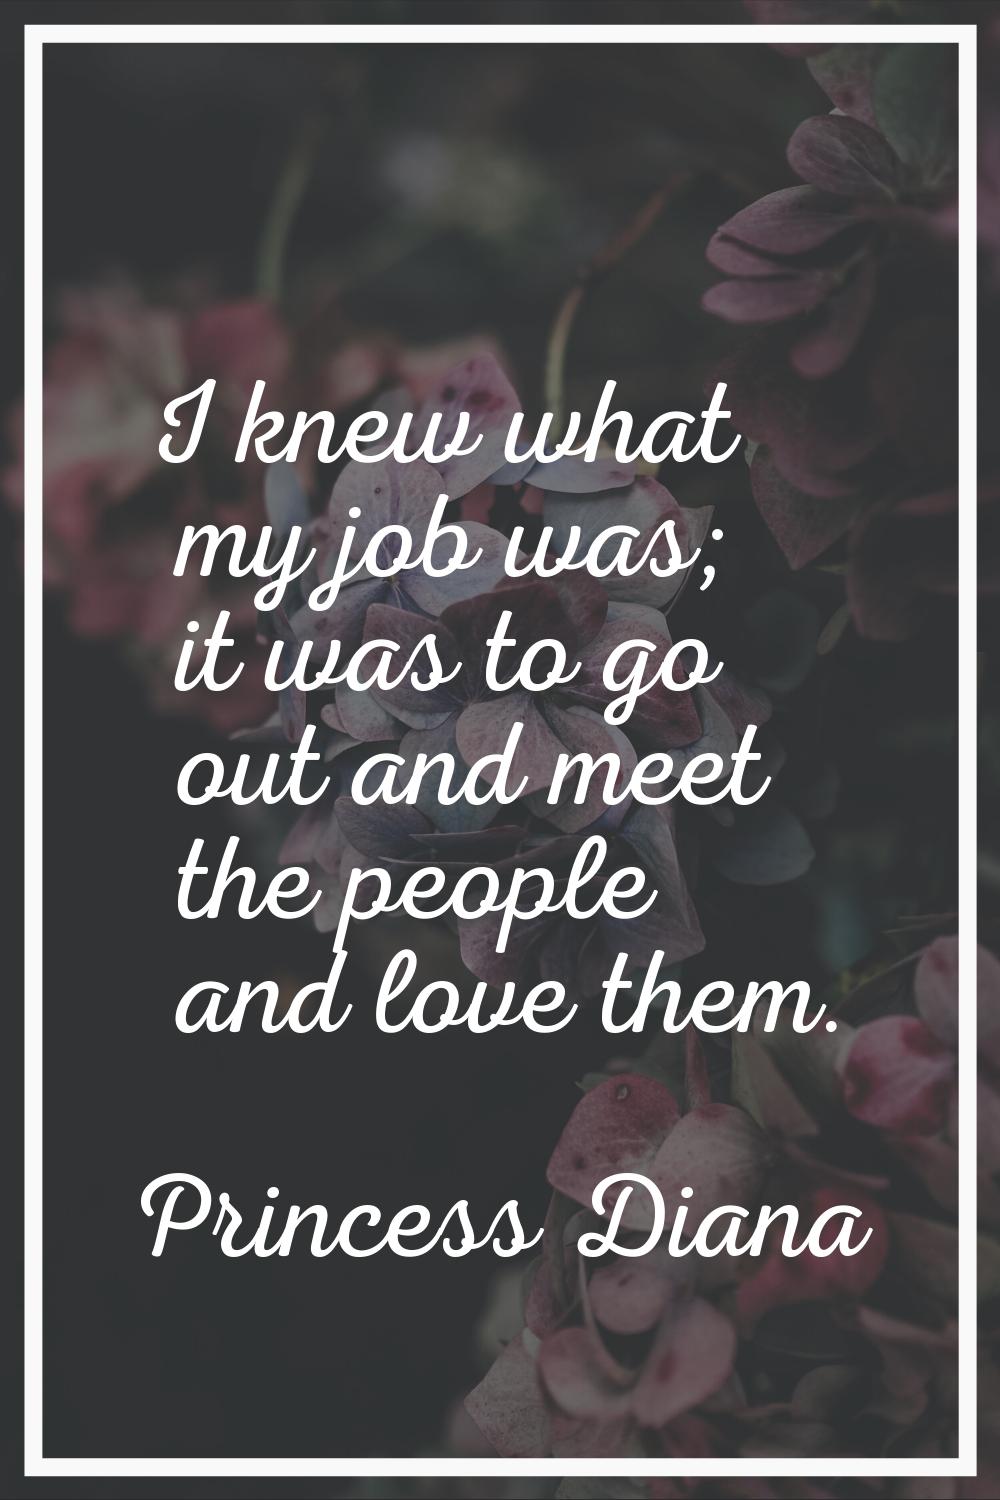 I knew what my job was; it was to go out and meet the people and love them.